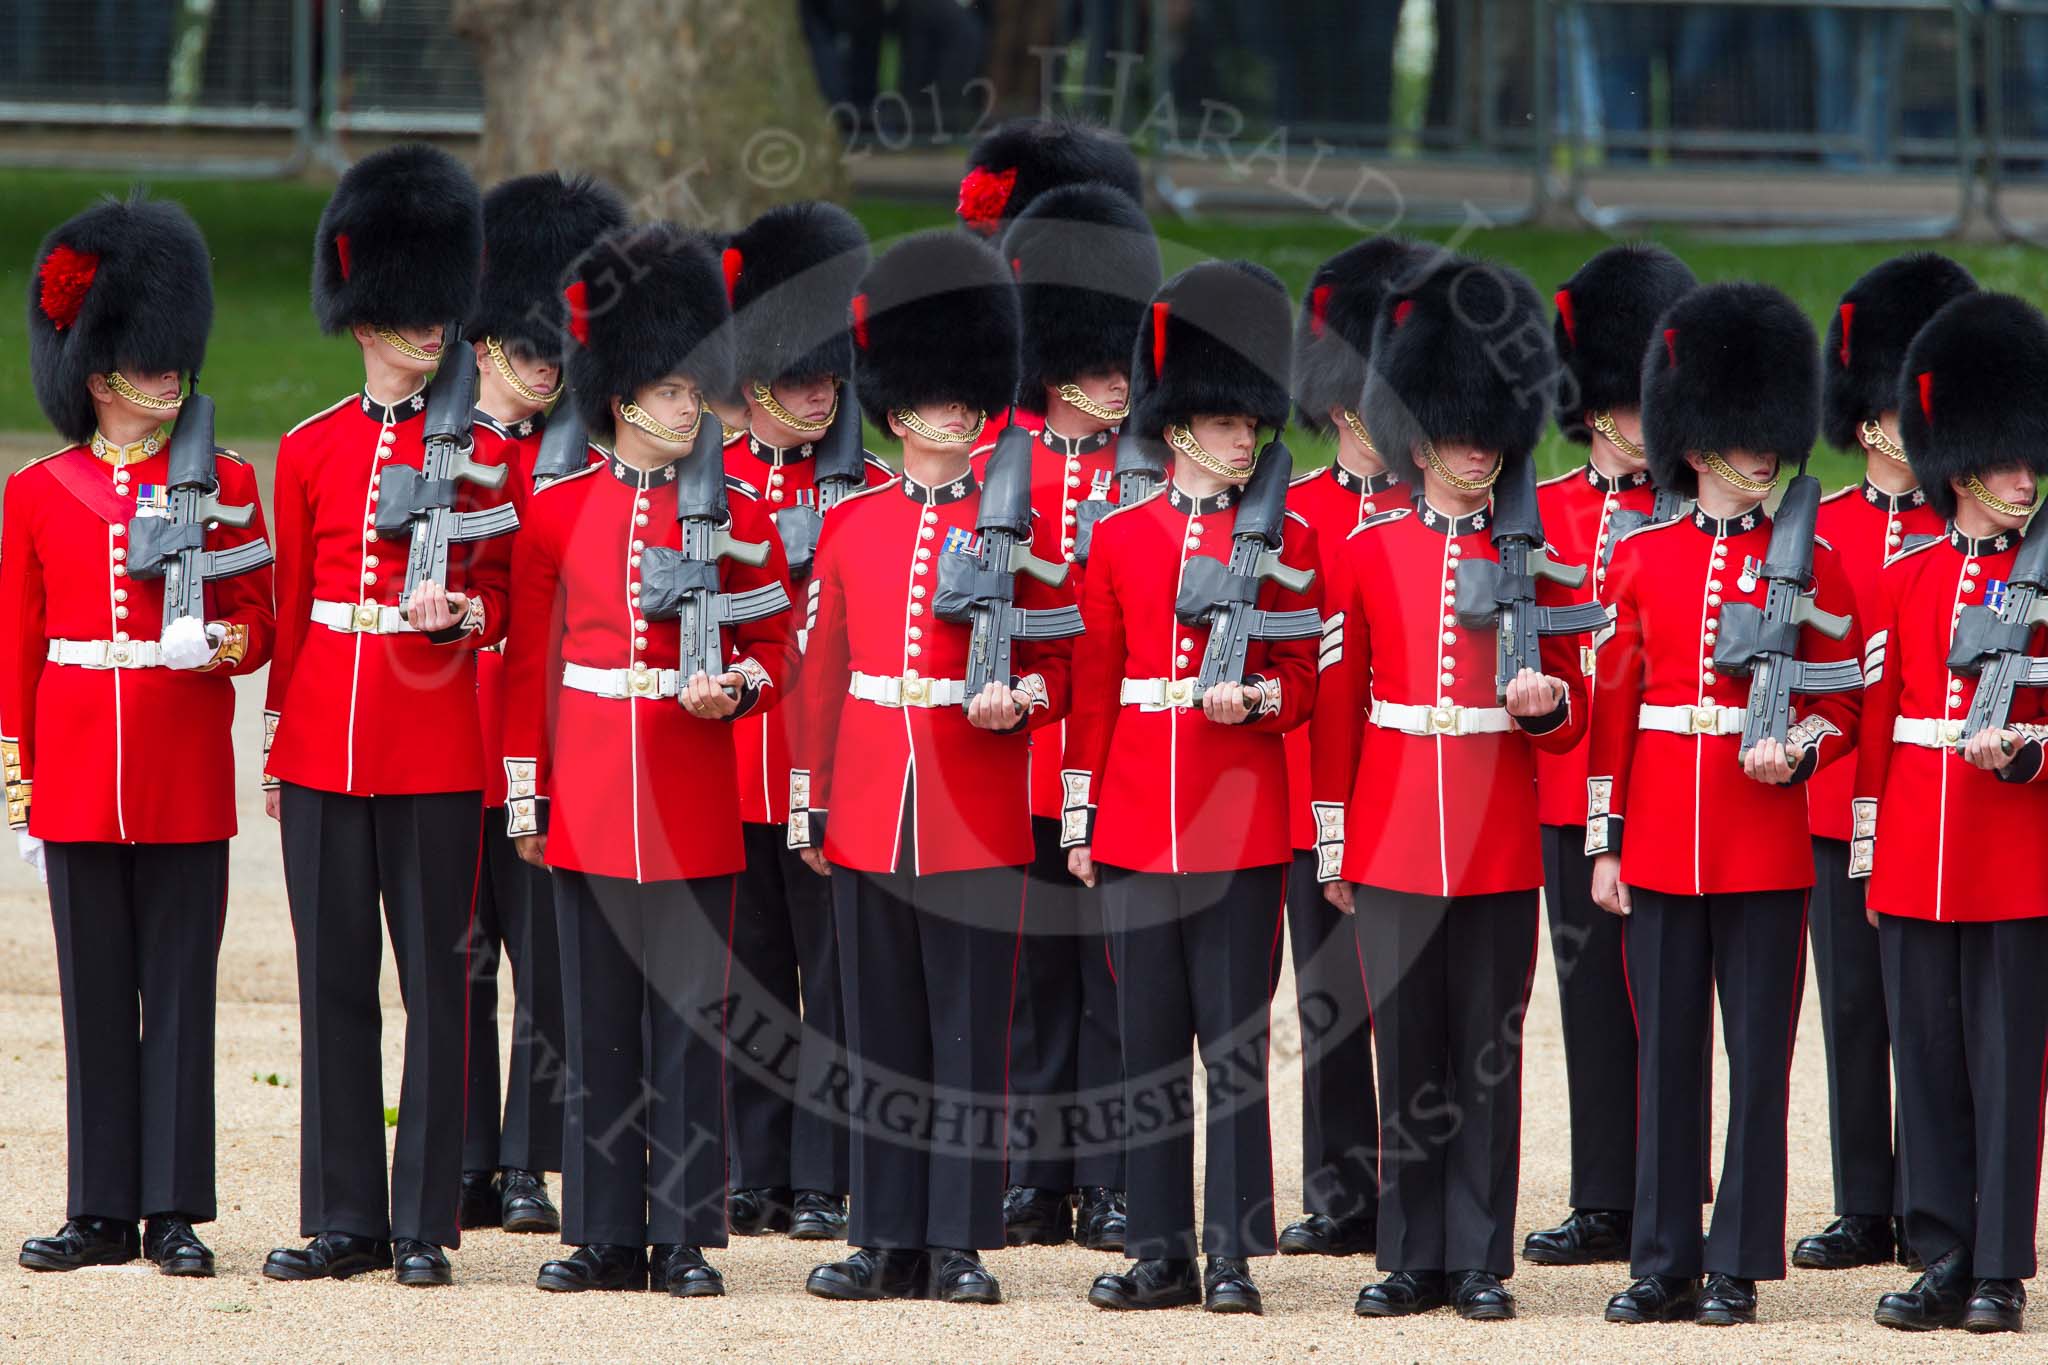 The Colonel's Review 2012: No. 1 Guard (Escort for the Colour)
1st Battalion Coldstream Guards..
Horse Guards Parade, Westminster,
London SW1,

United Kingdom,
on 09 June 2012 at 10:35, image #95